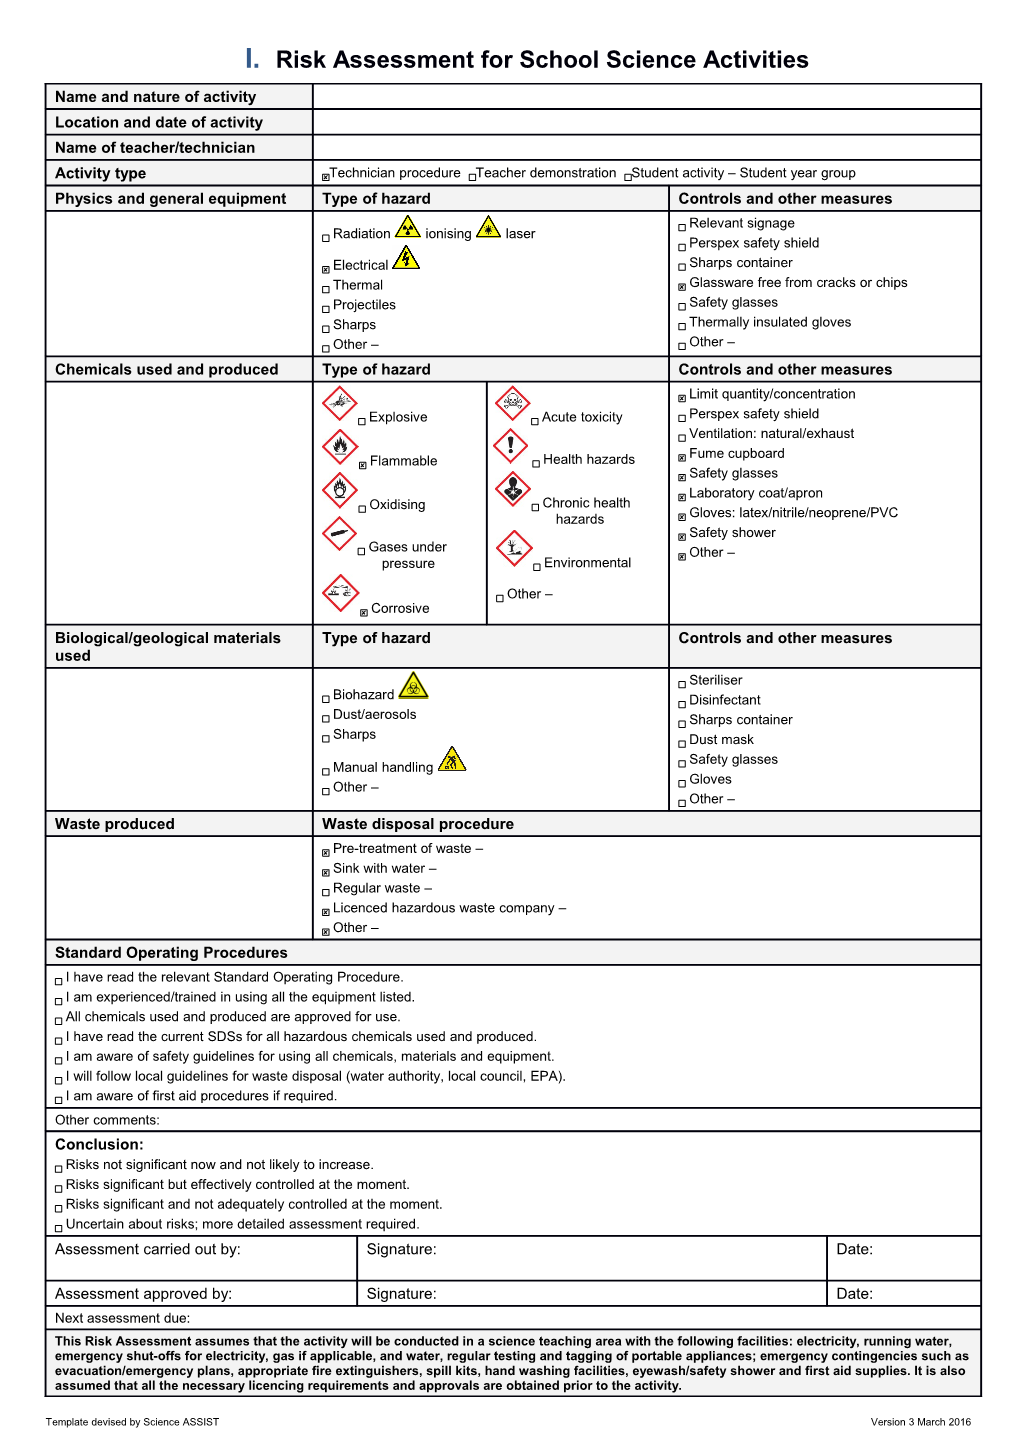 Risk Assessment for School Science Activities